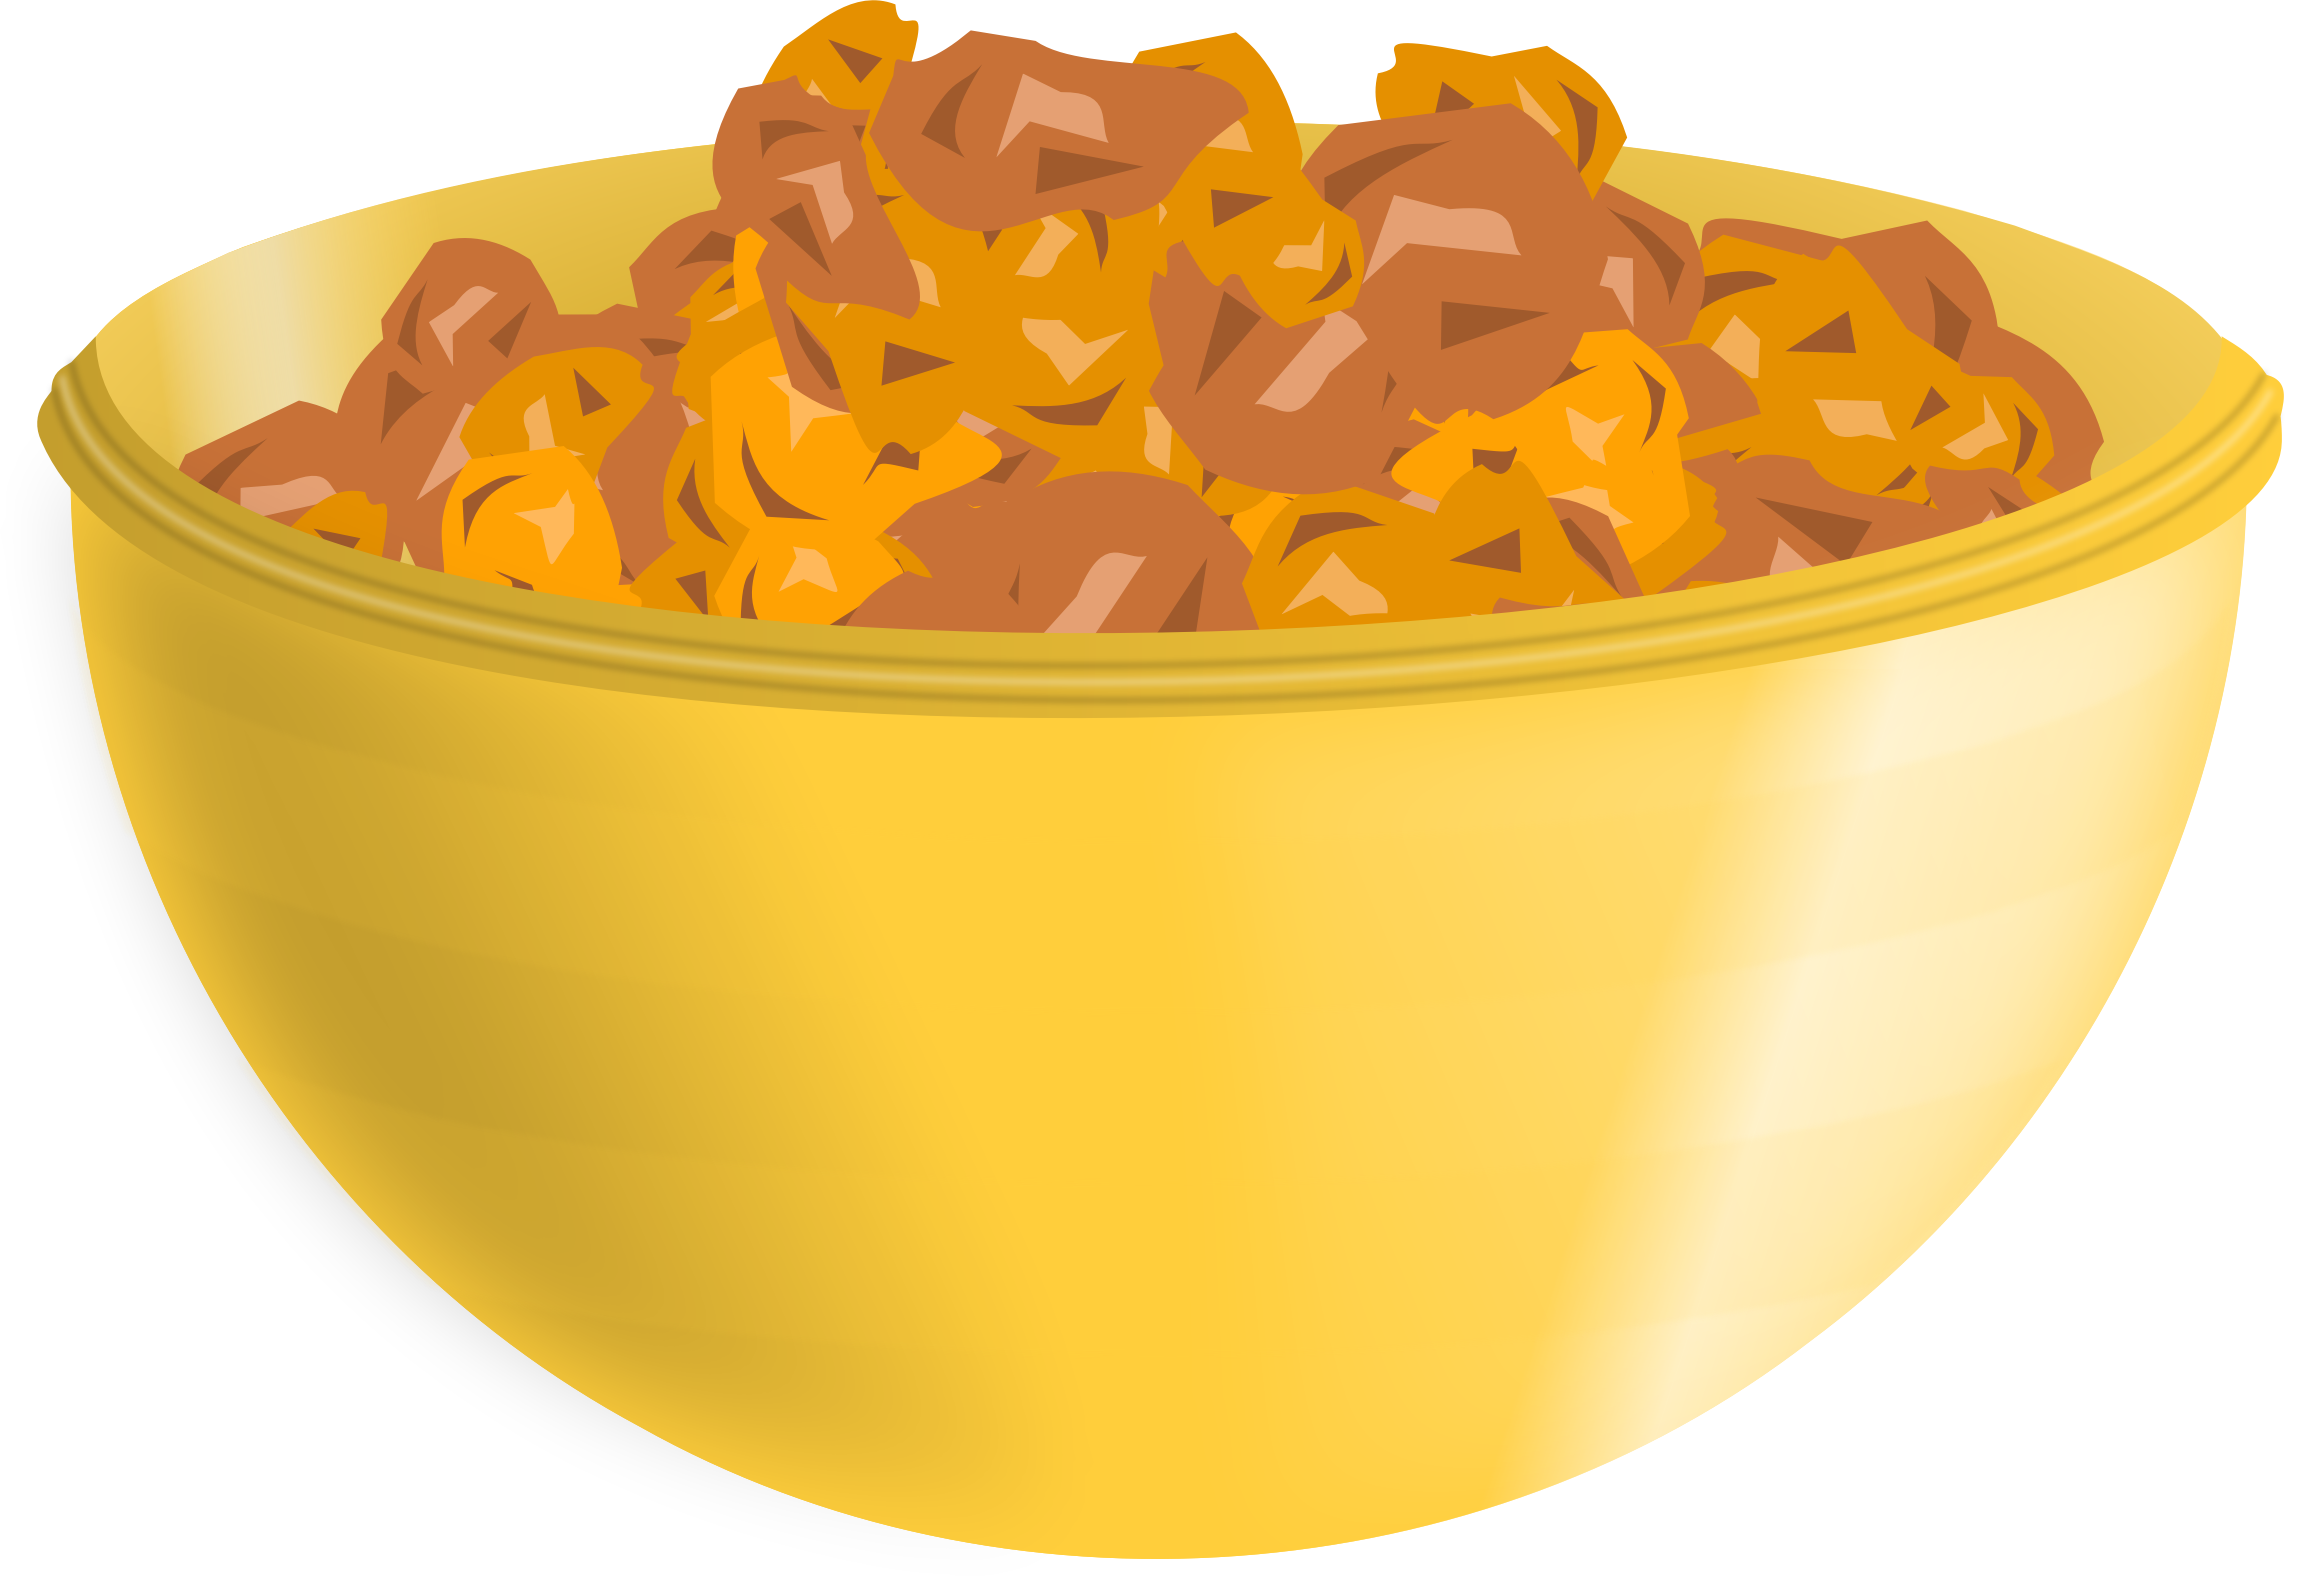 Cereal Clipart big bowl - Cereal Clipart